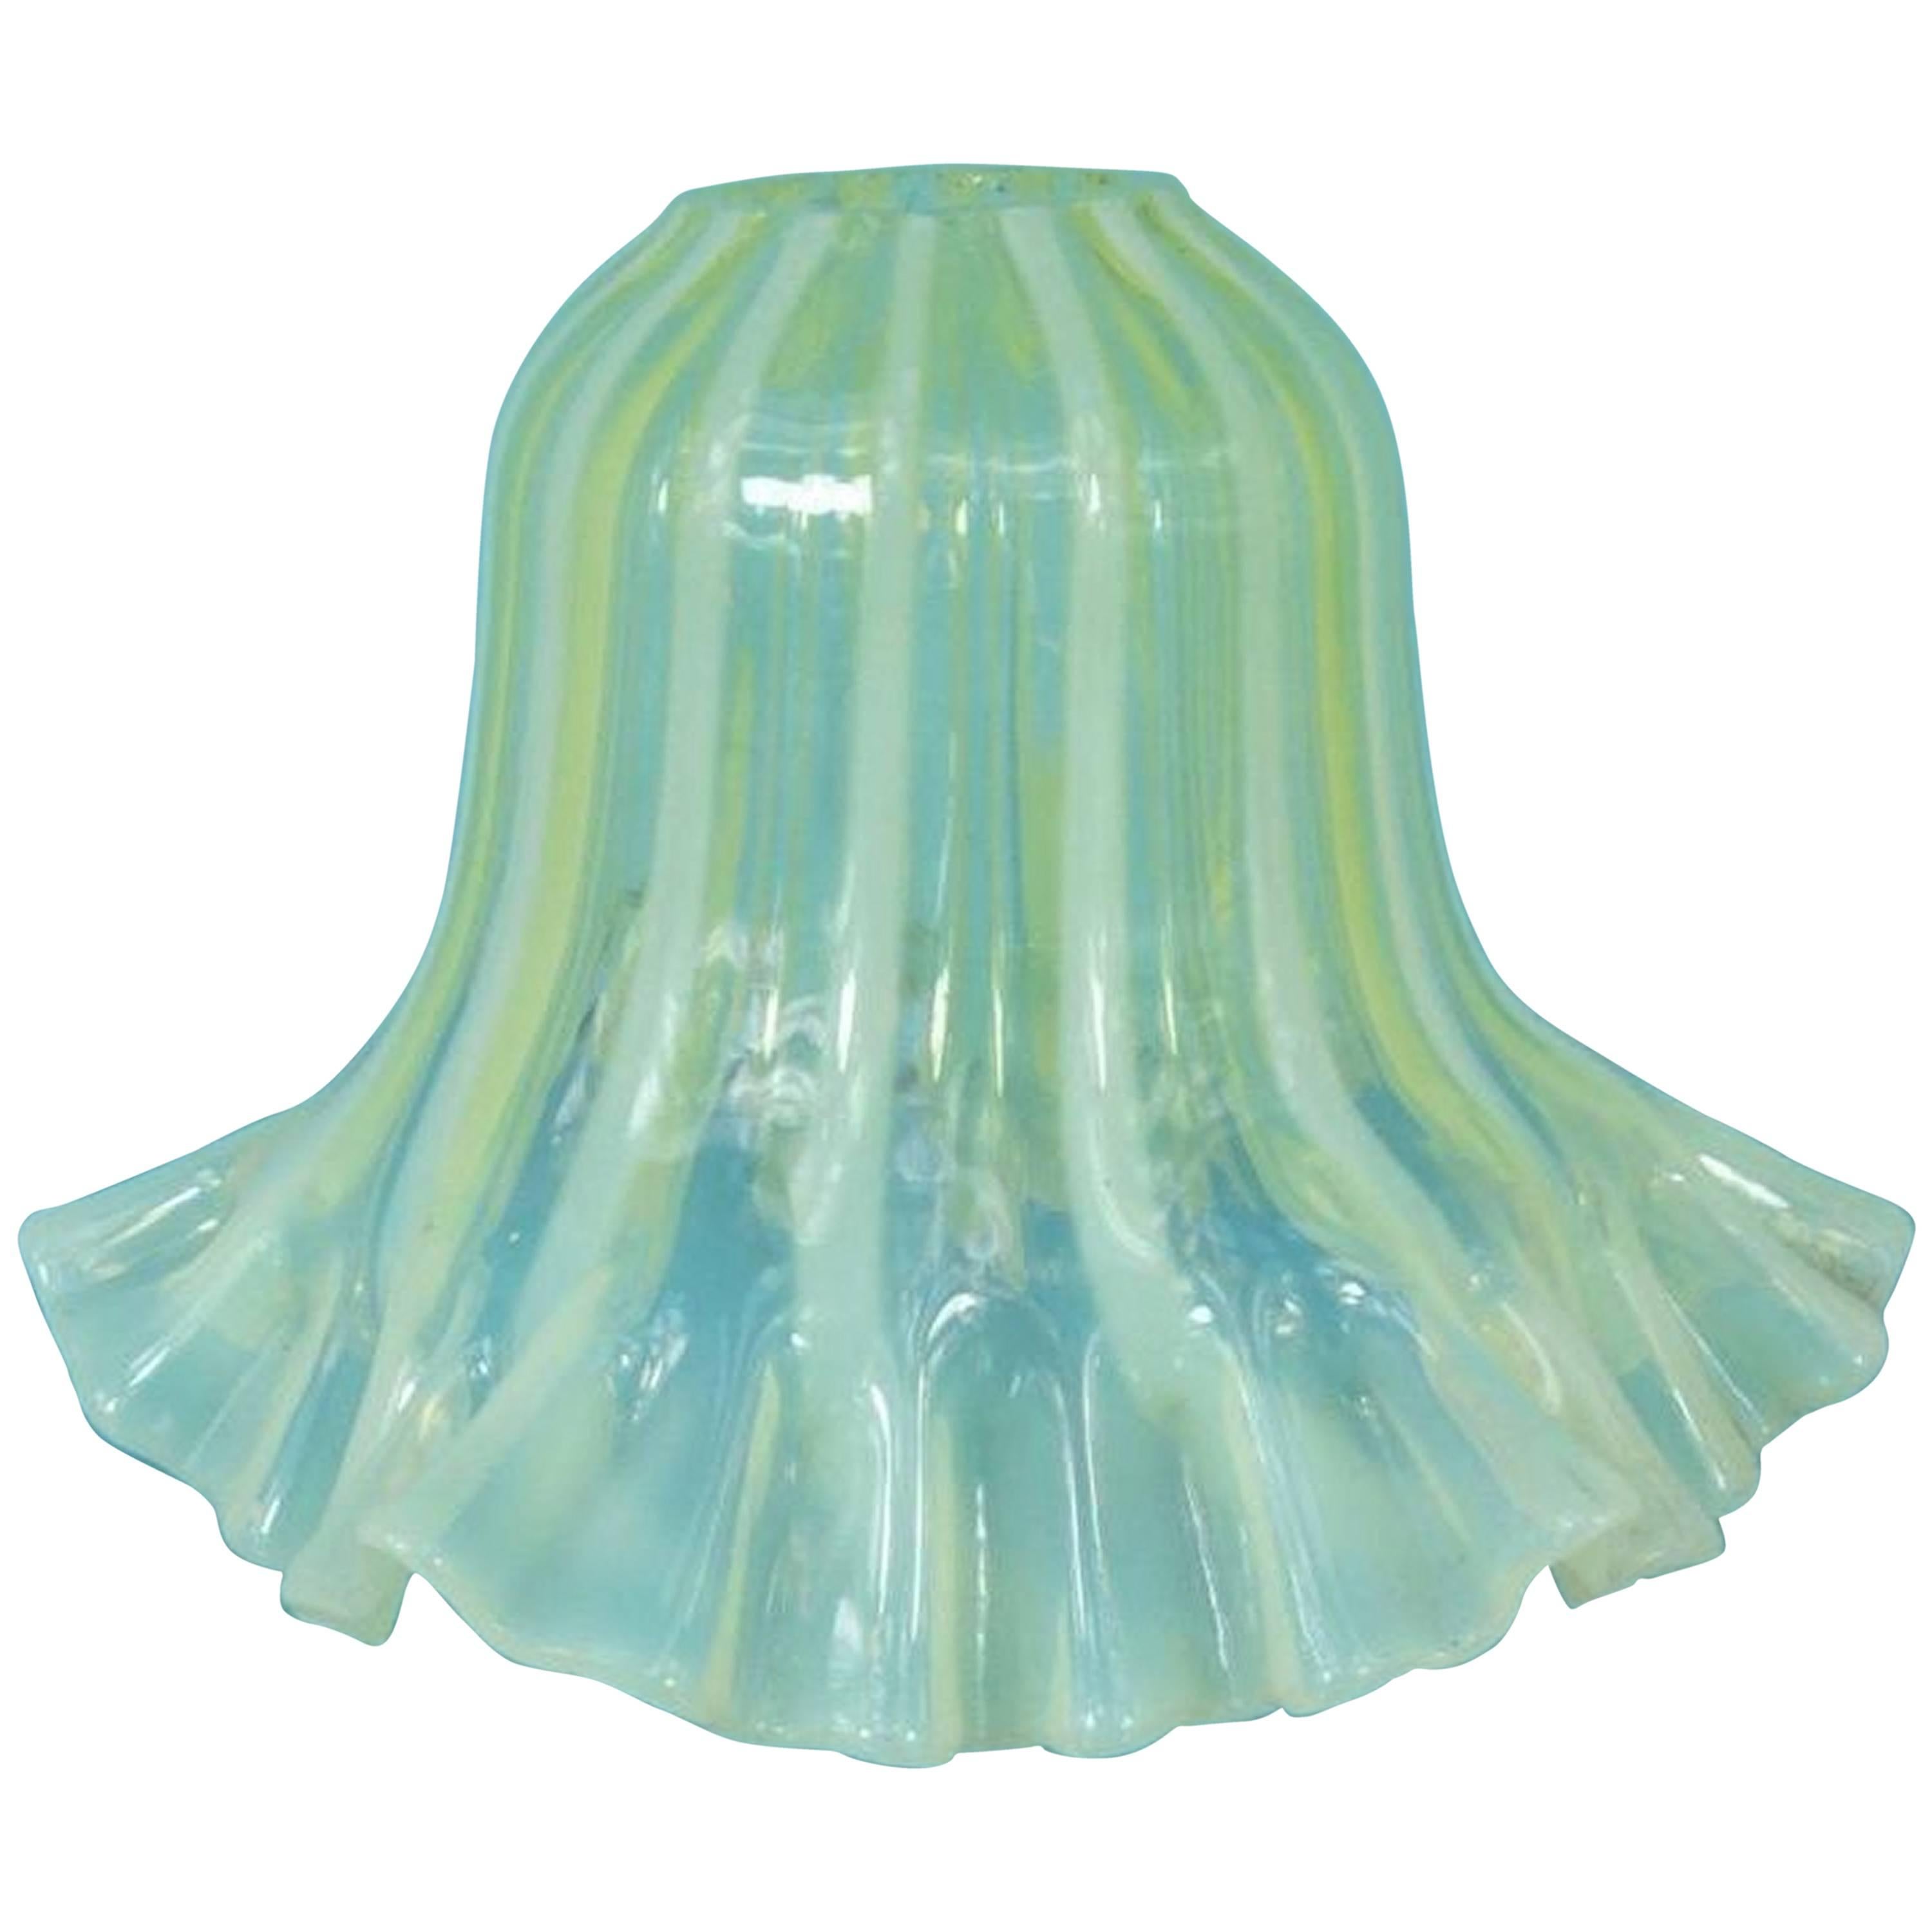 Heavily Pleated Vaseline Shade, Consisting of Alternating Shades of Stripes For Sale